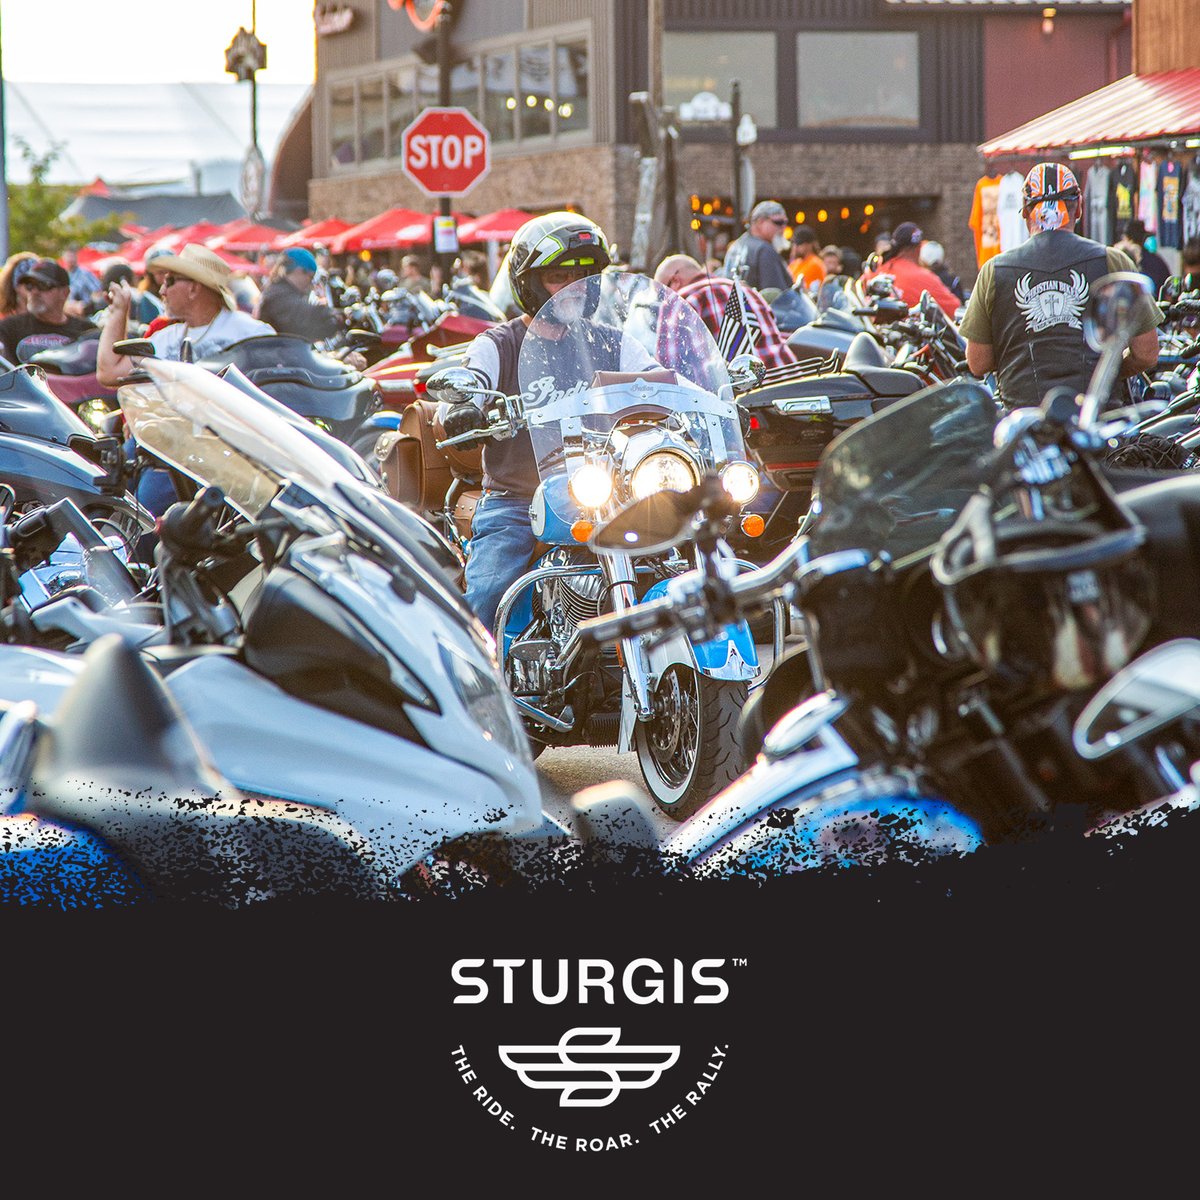 Only 8 more months until the 84th Sturgis Motorcycle Rally! - #sturgis #sturgisrally